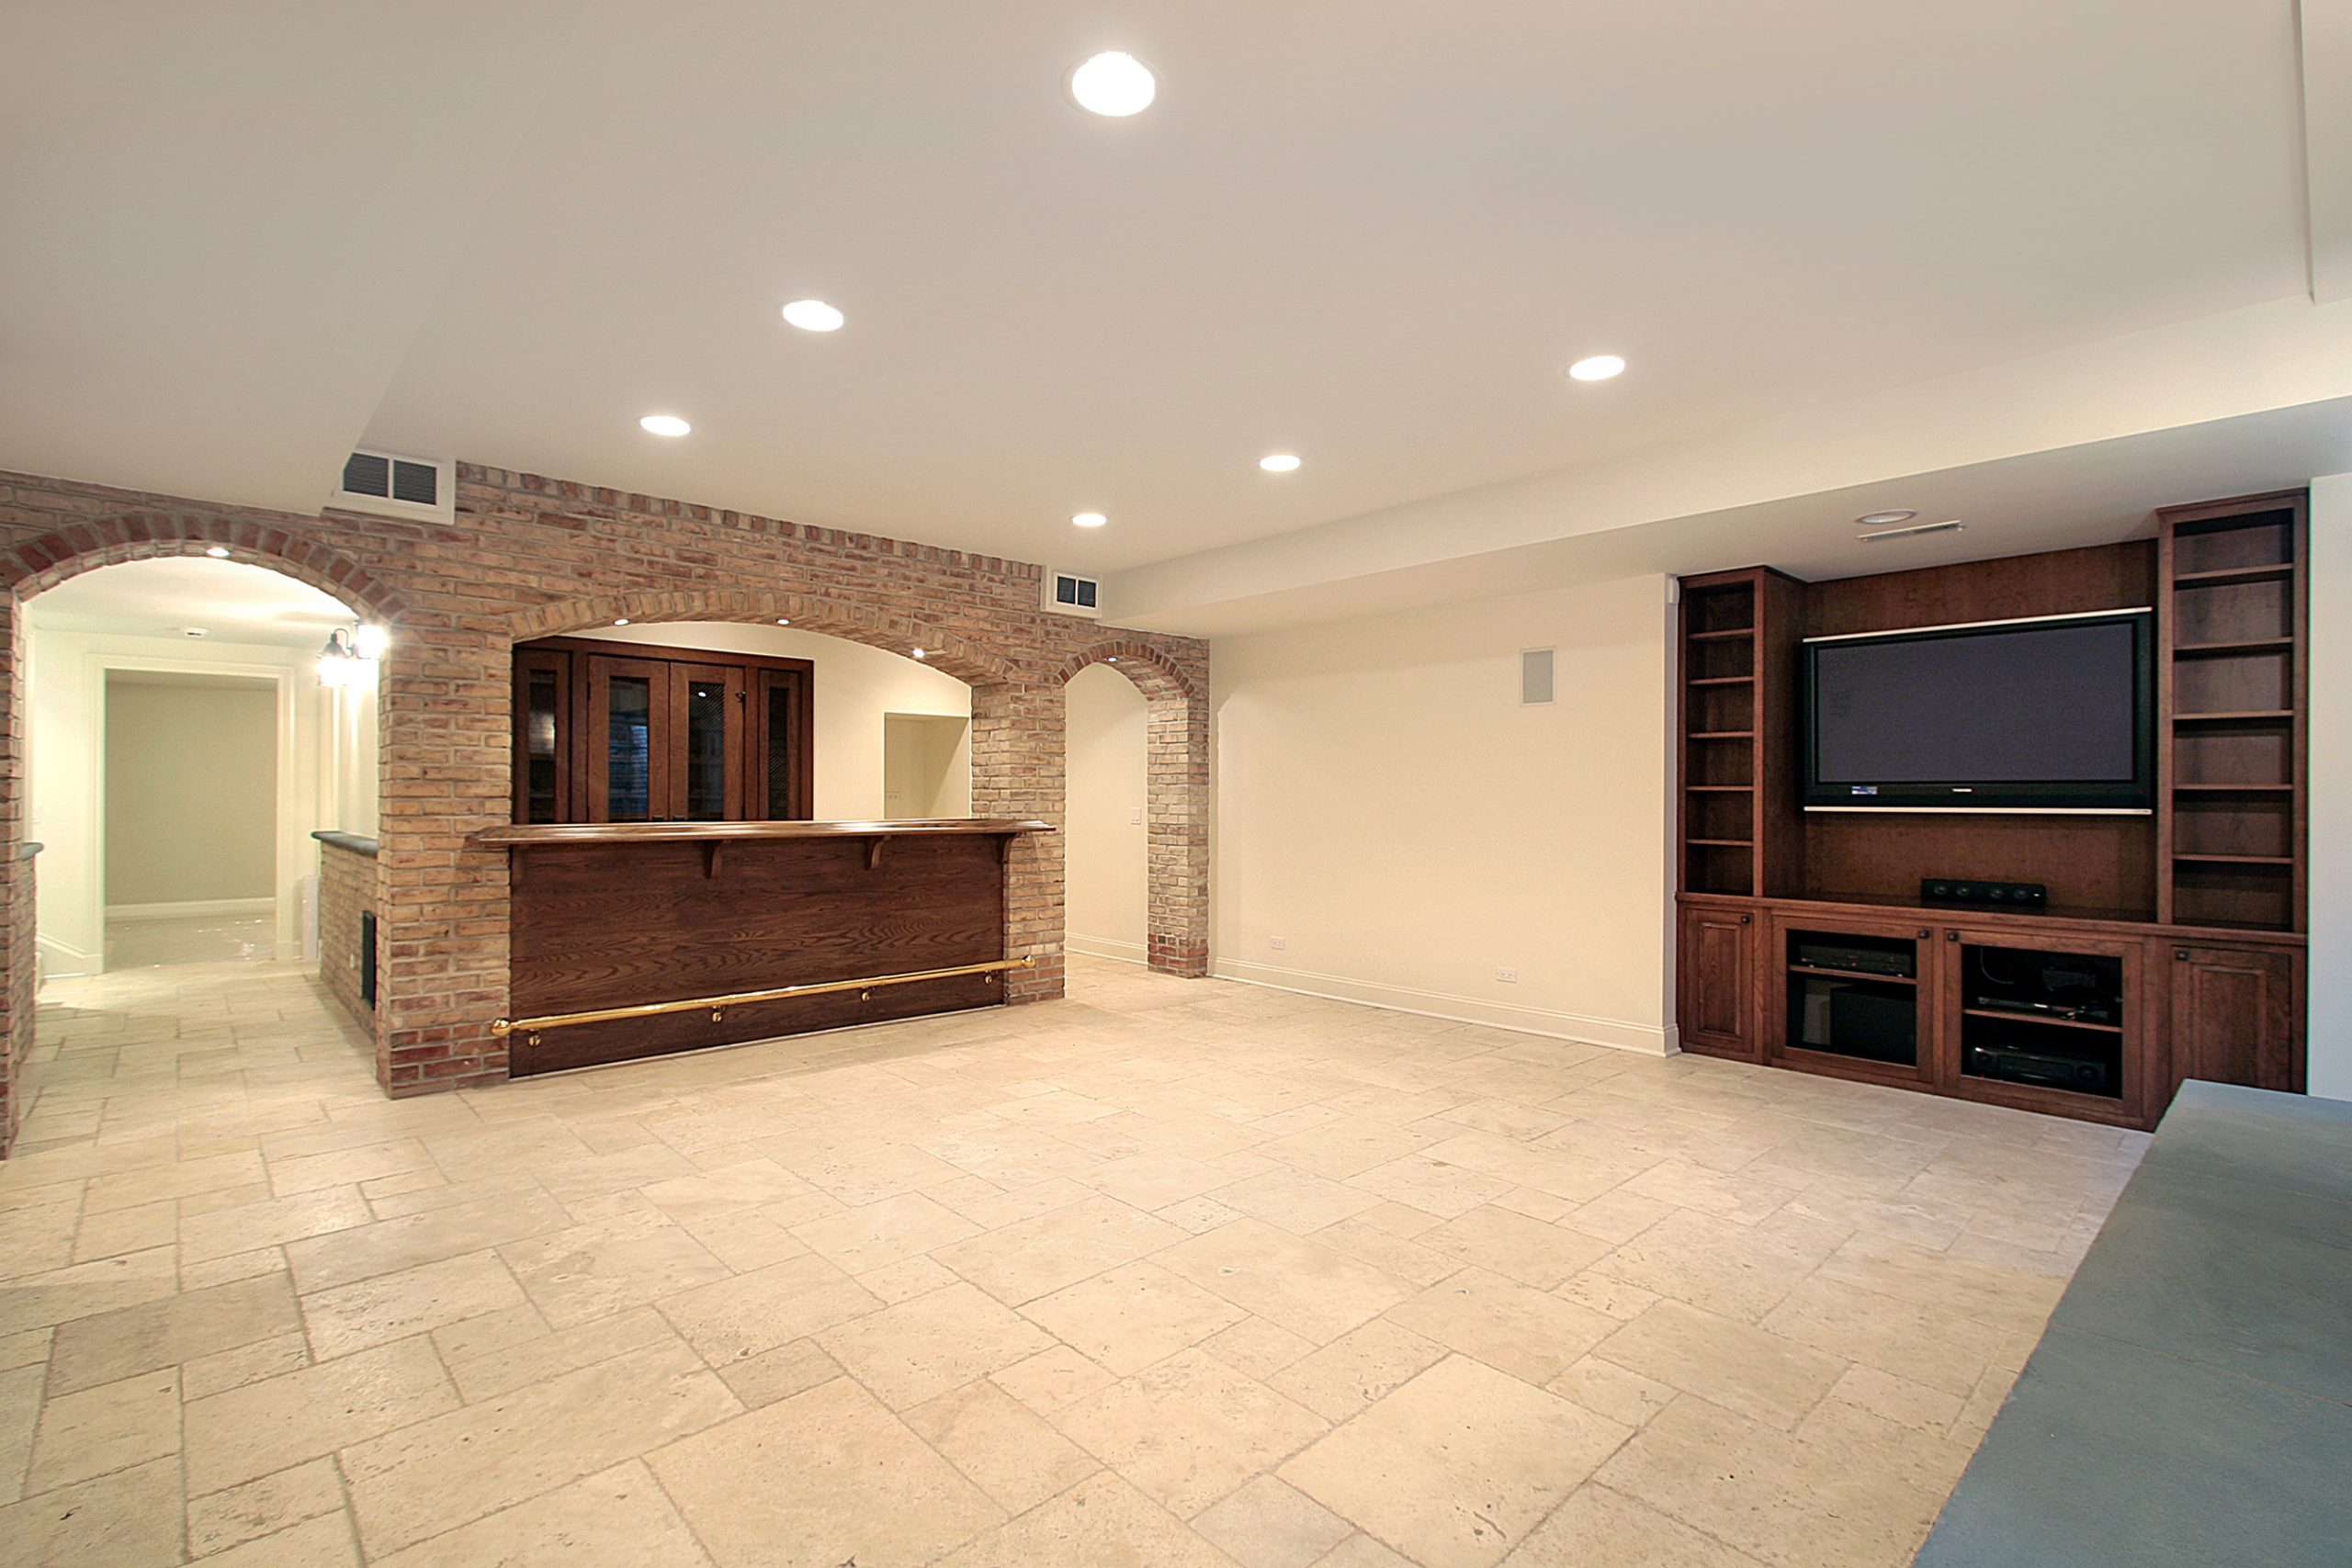 What is the first thing to do when finishing a basement?